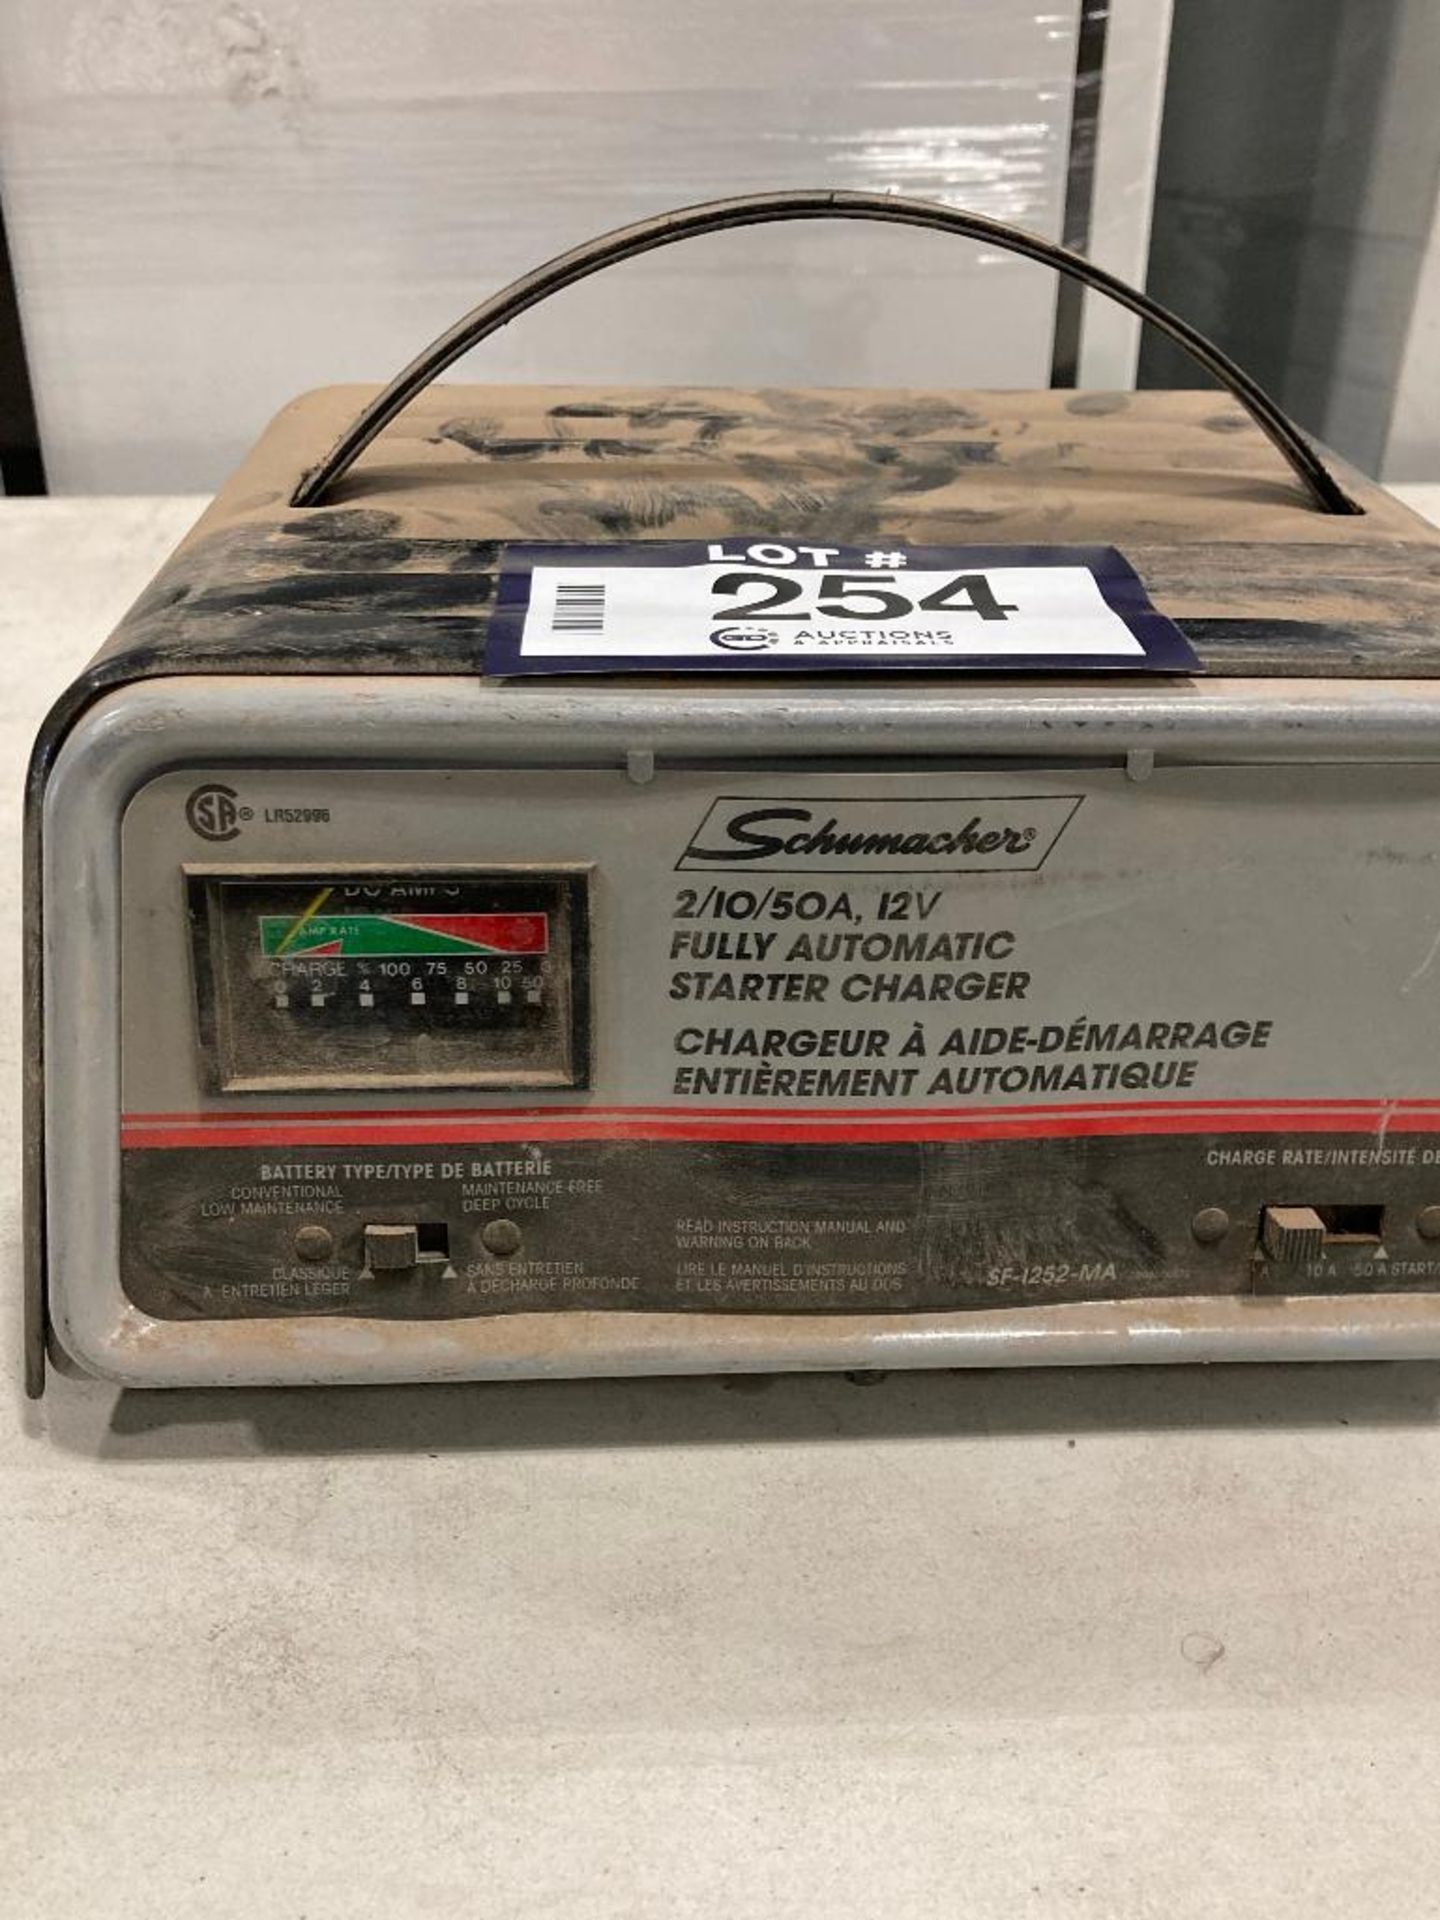 Schumacher 2/10/50 AMP Fully Automatic Starter Charger SE-5212A - Image 4 of 4